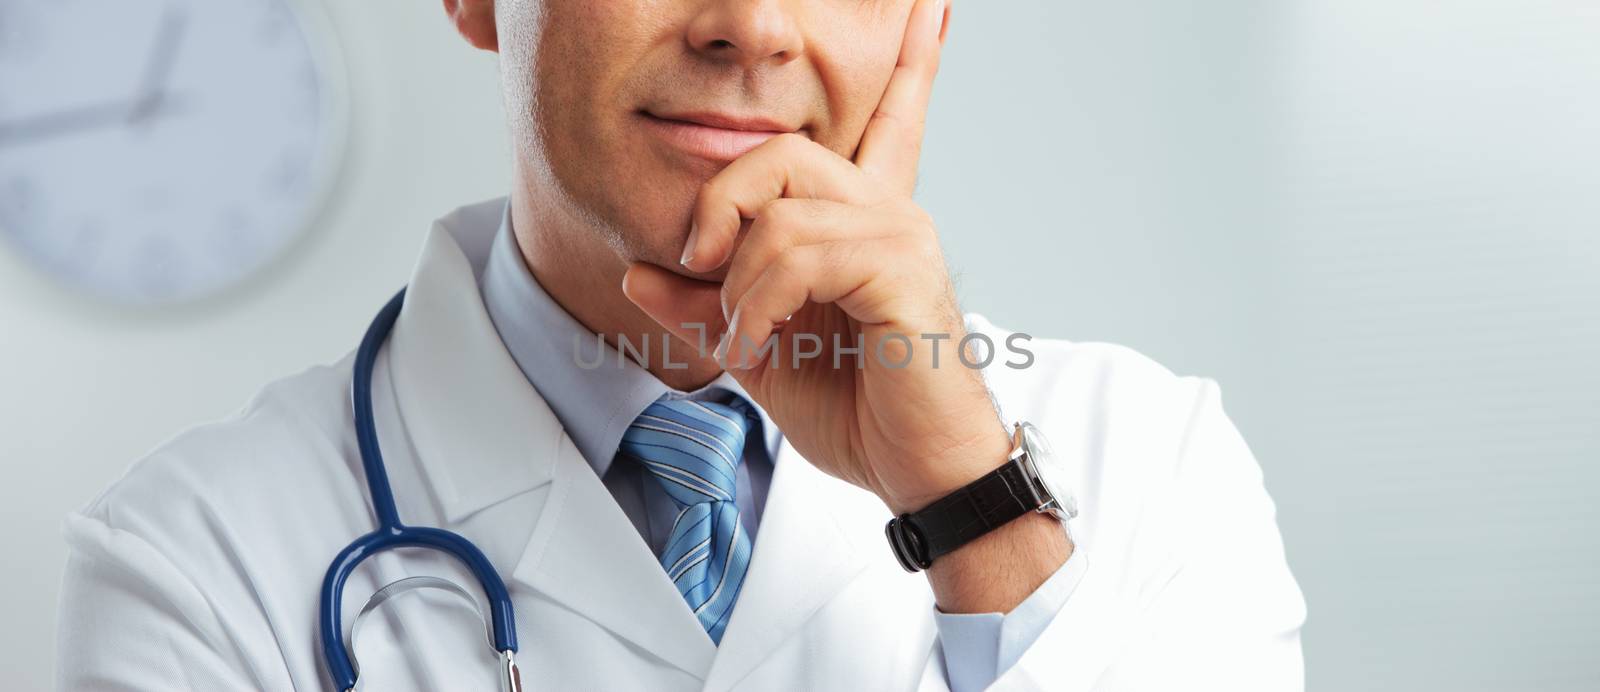 Close up portrait of a handsome male doctor